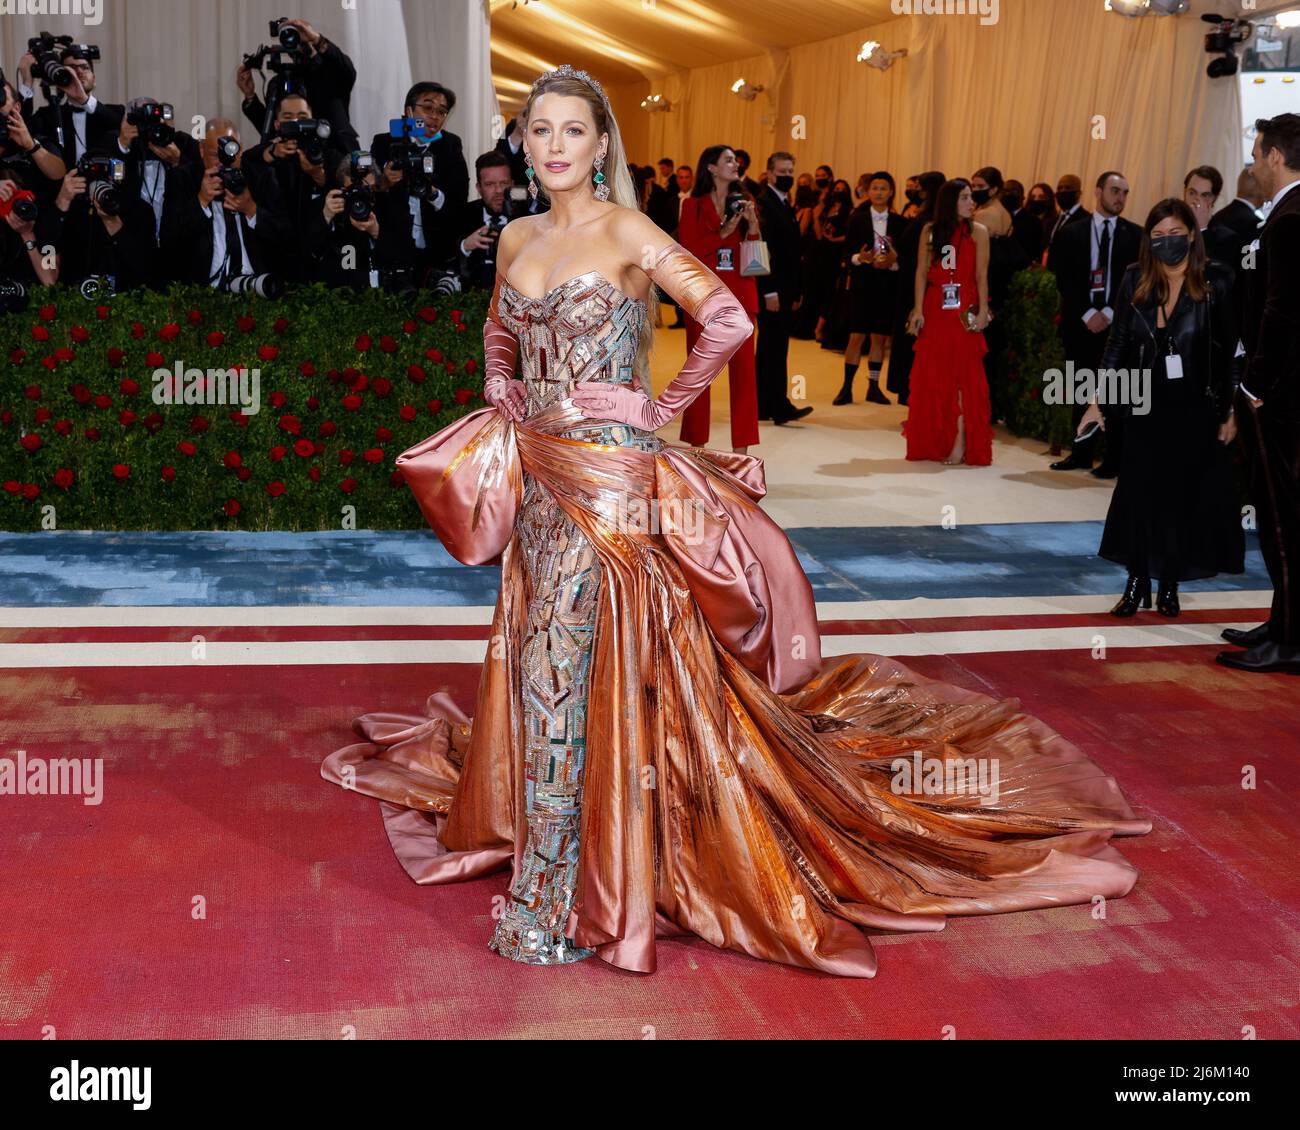 Blake Lively arrives on the red carpet for The Met Gala at The Metropolitan Museum of Art celebrating the Costume Institute opening of 'In America: An Anthology of Fashion' in New York City on Monday, May 2, 2022.       Photo by John Angelillo/UPI Stock Photo